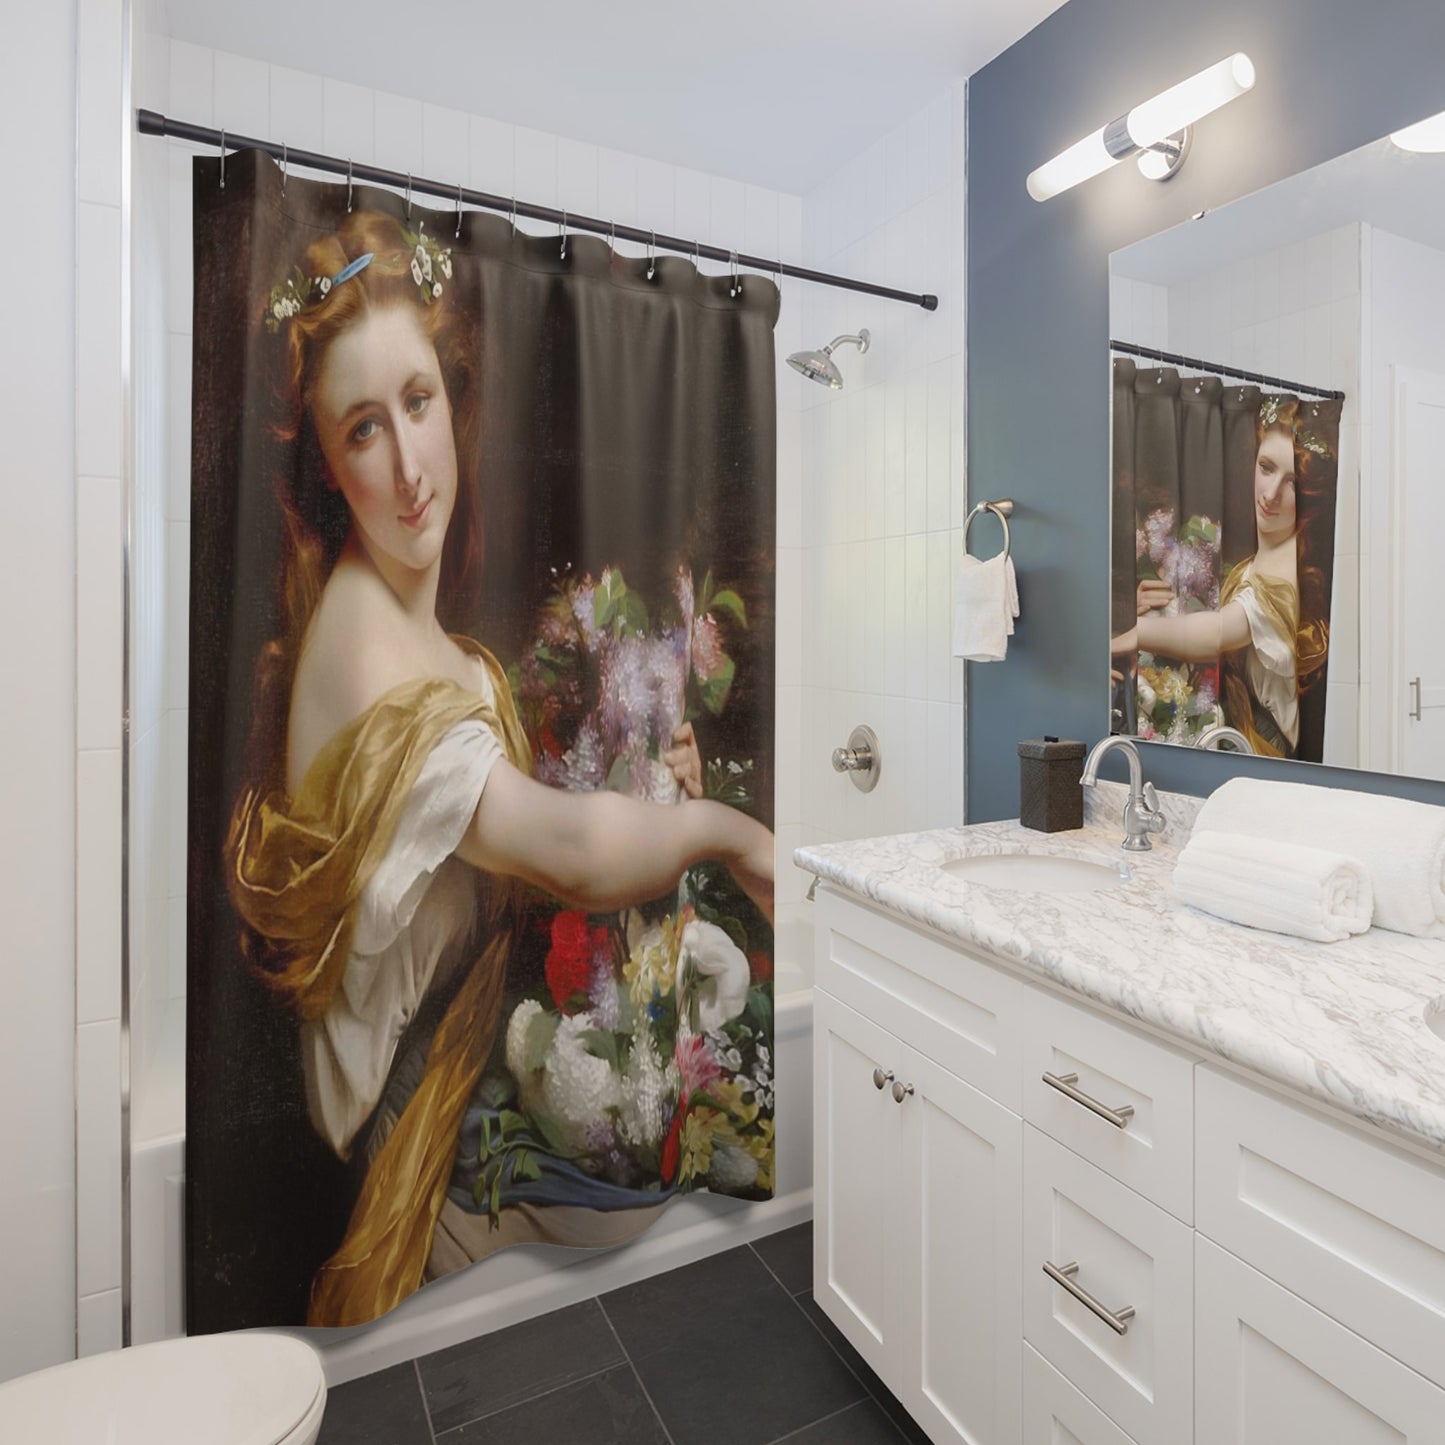 Young Maiden Shower Curtain Best Bathroom Decorating Ideas for Love and Romance Decor